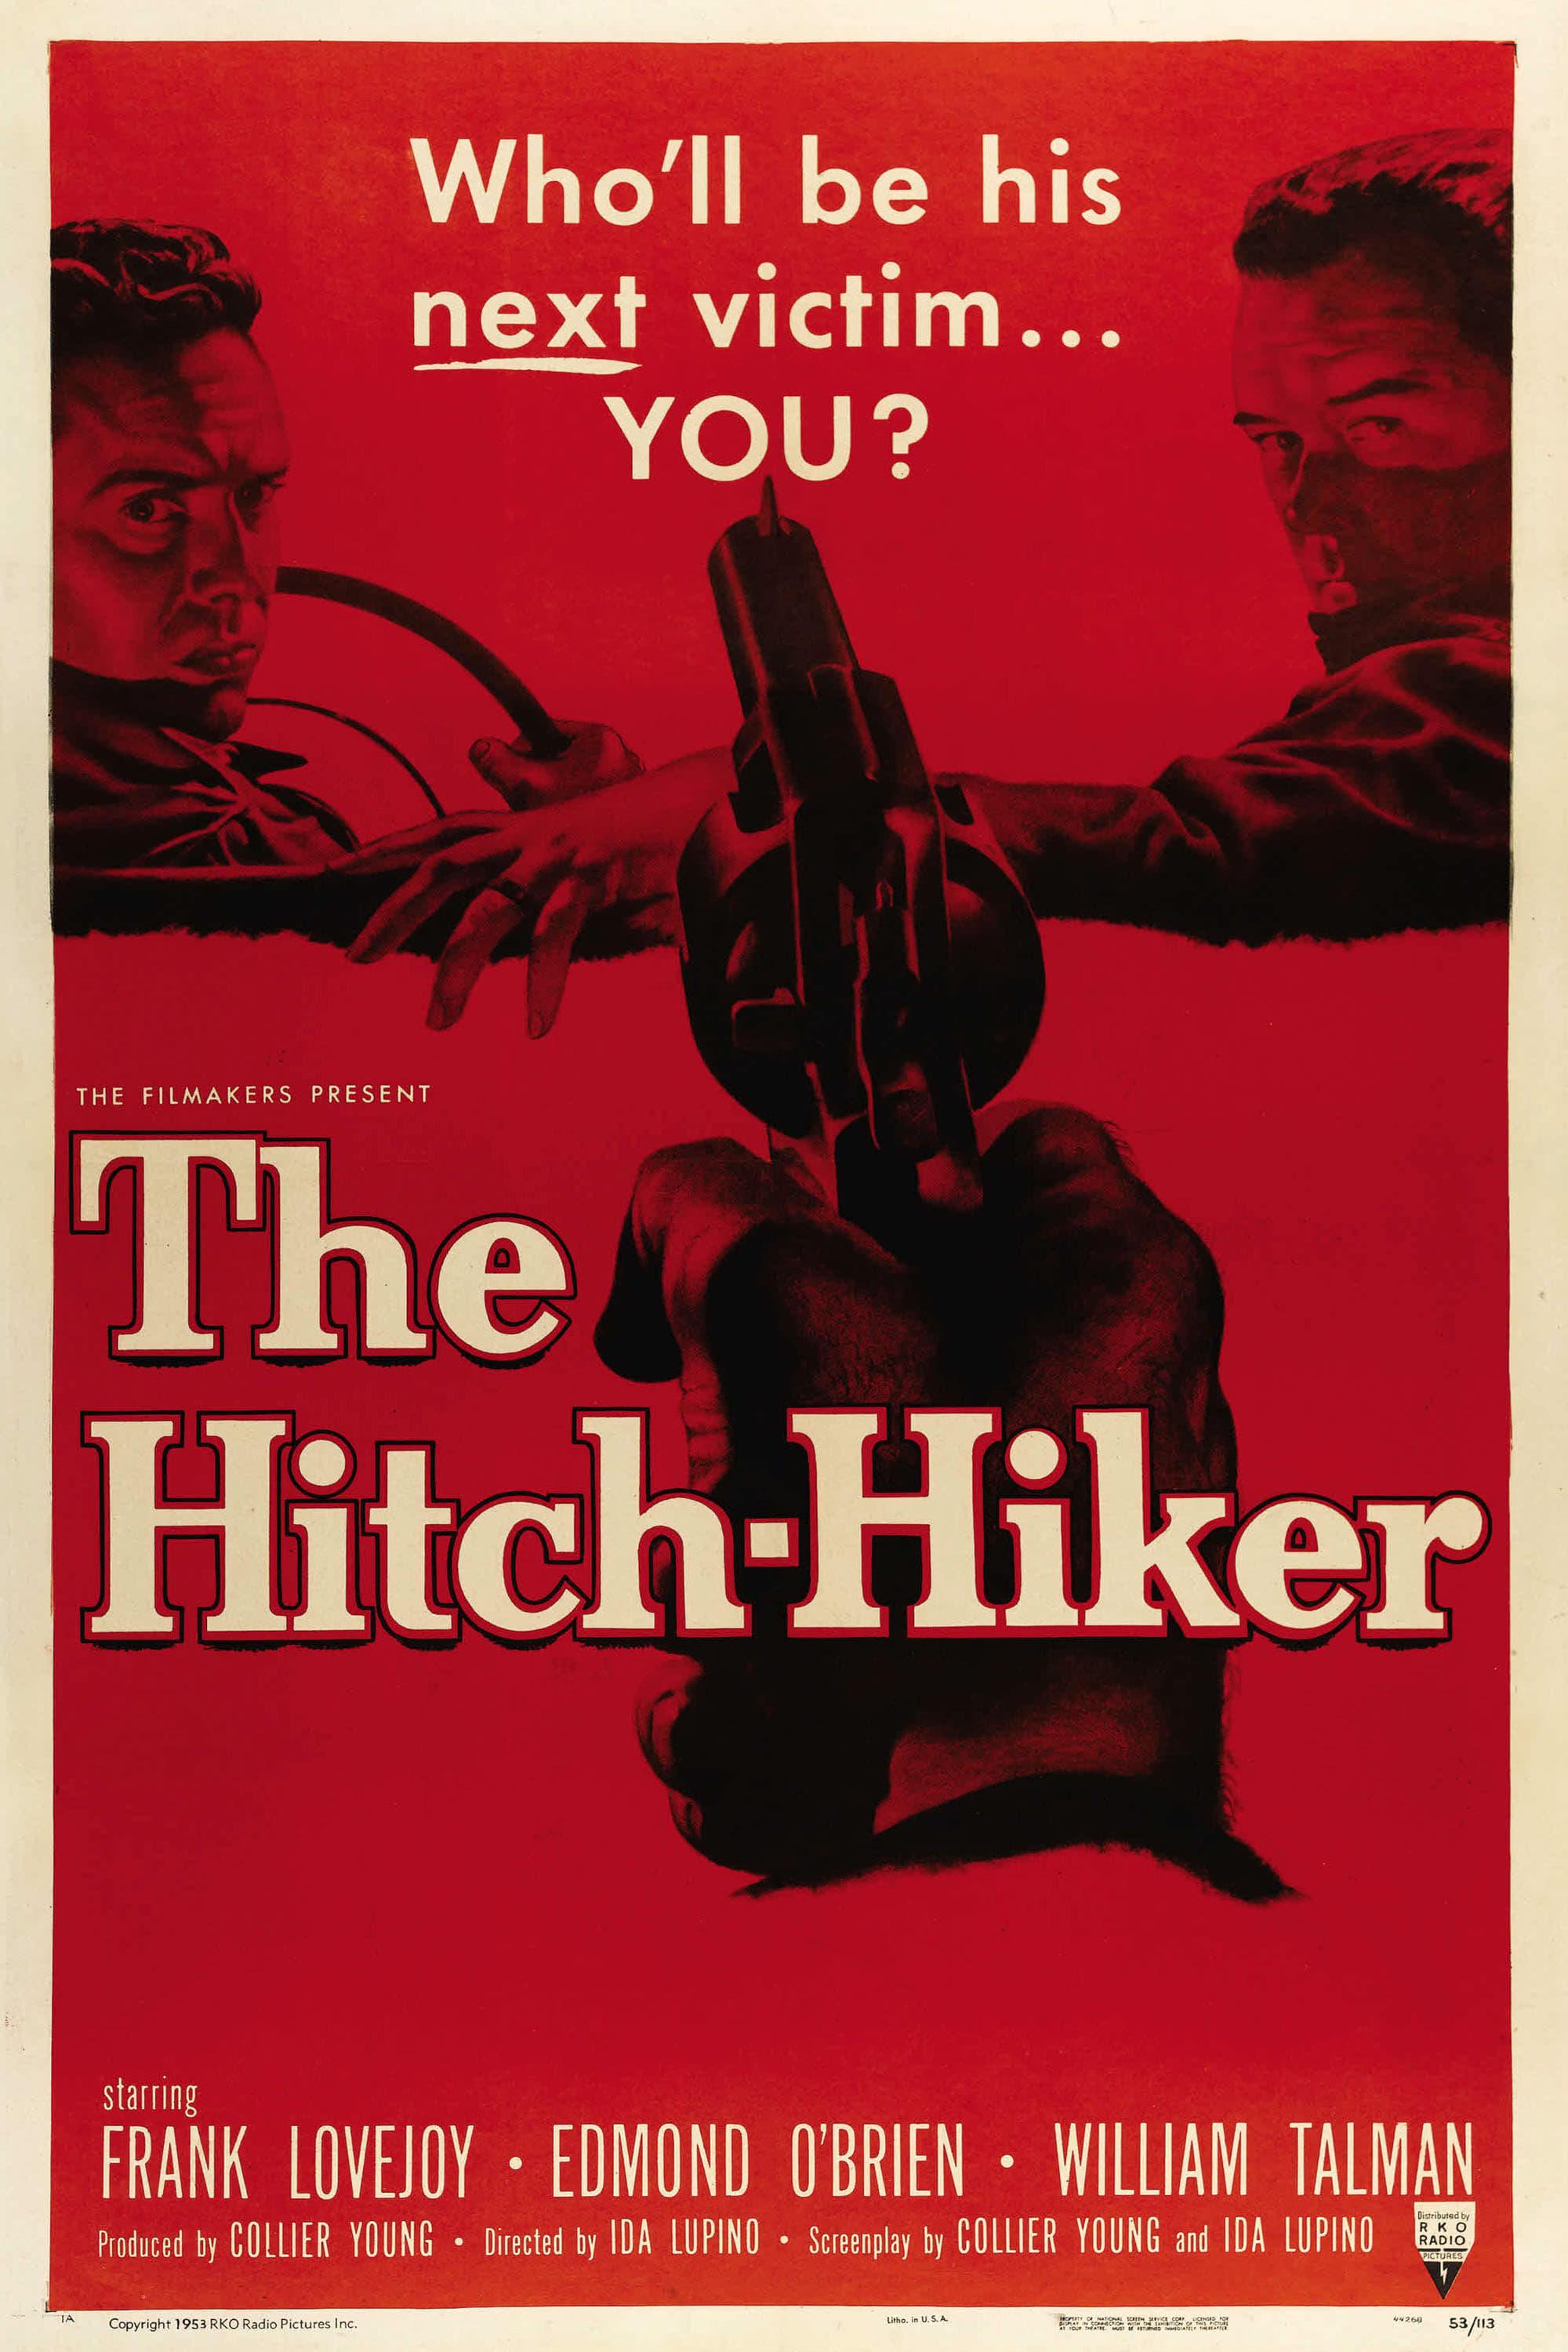 The Hitch-Hiker poster